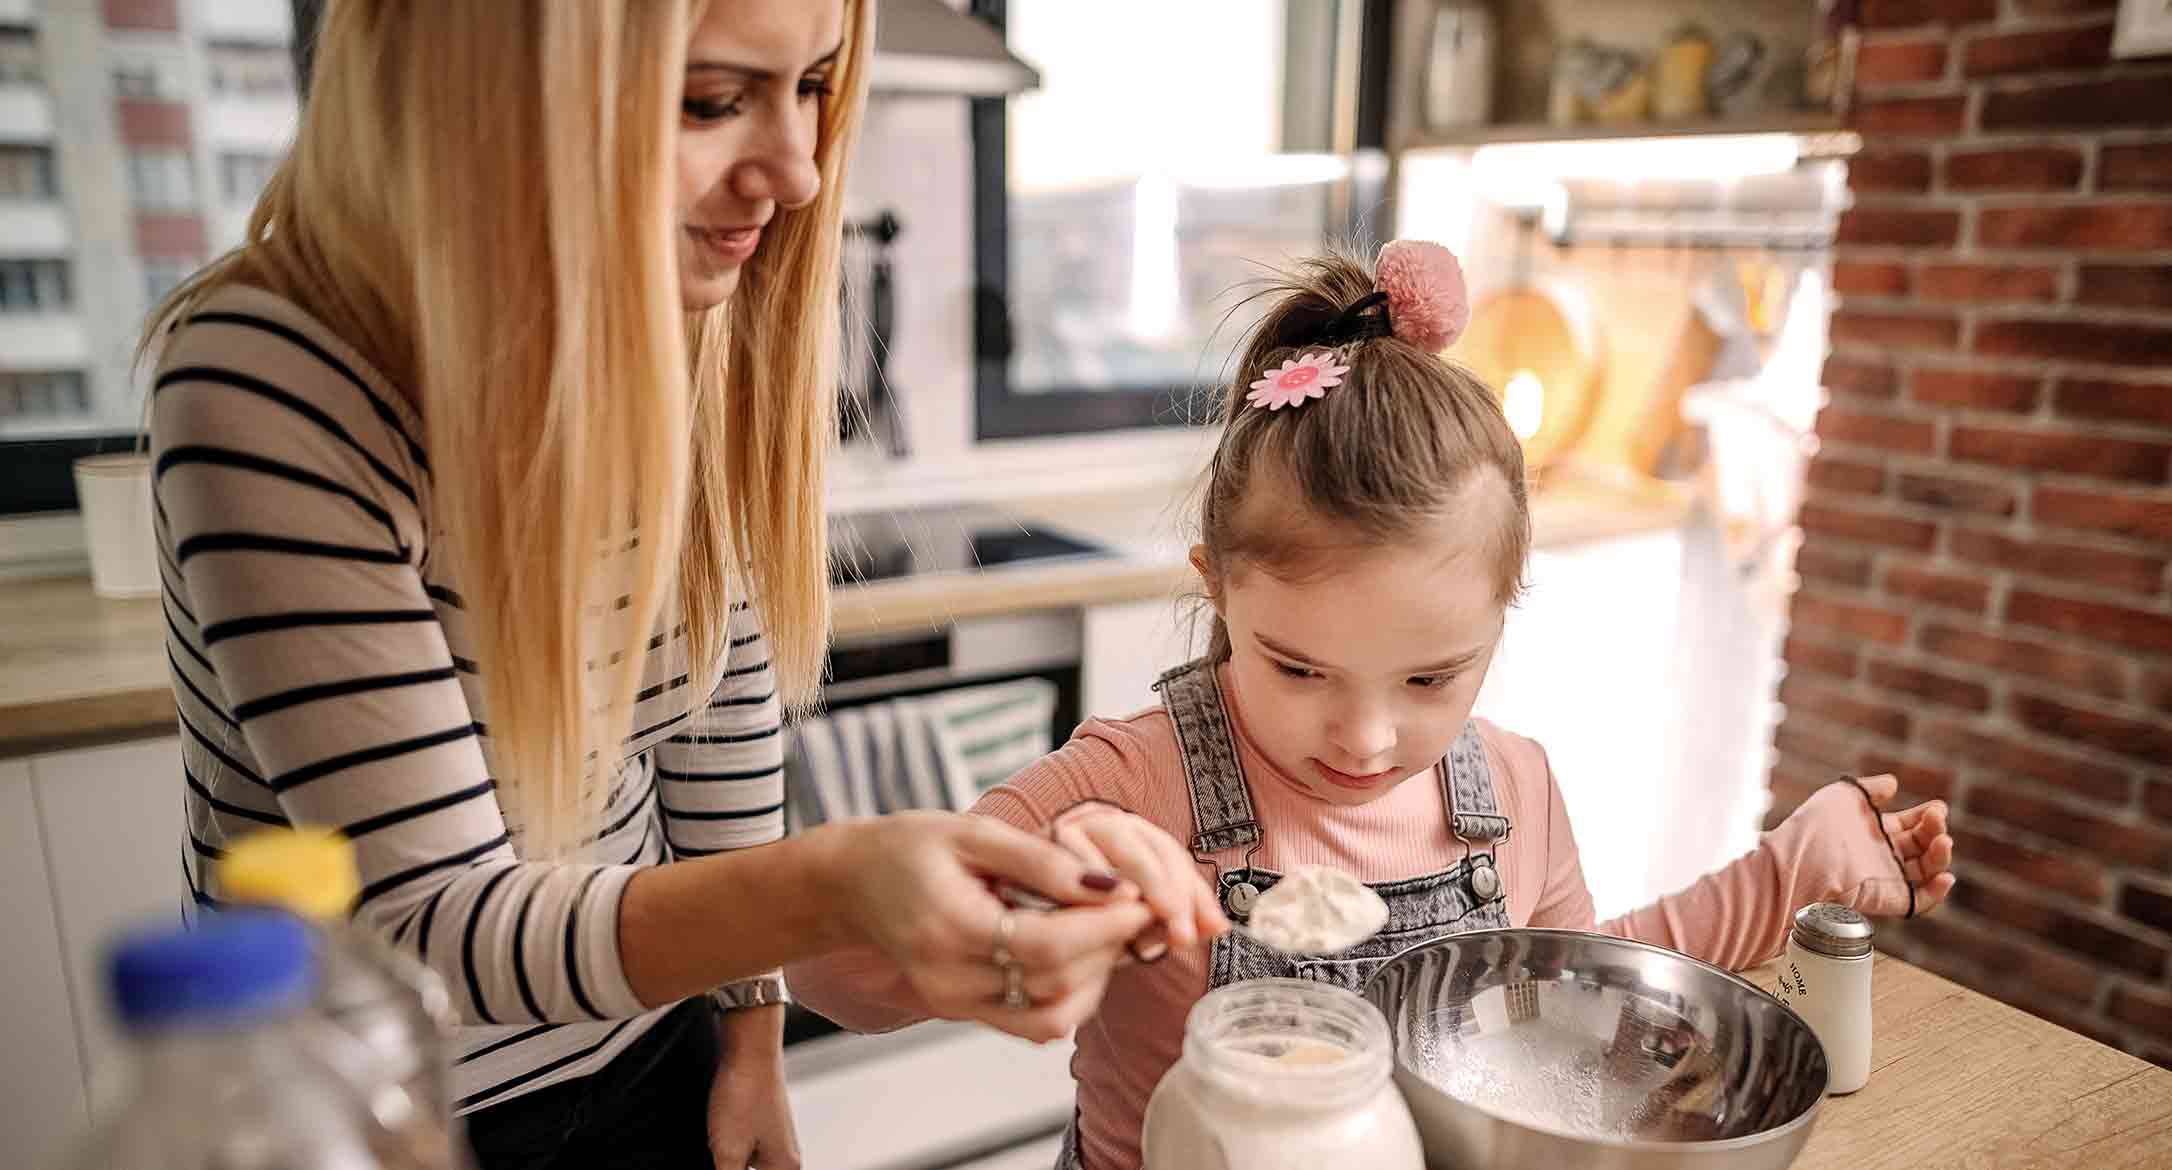 A daughter and her mom baking together in a kitchen